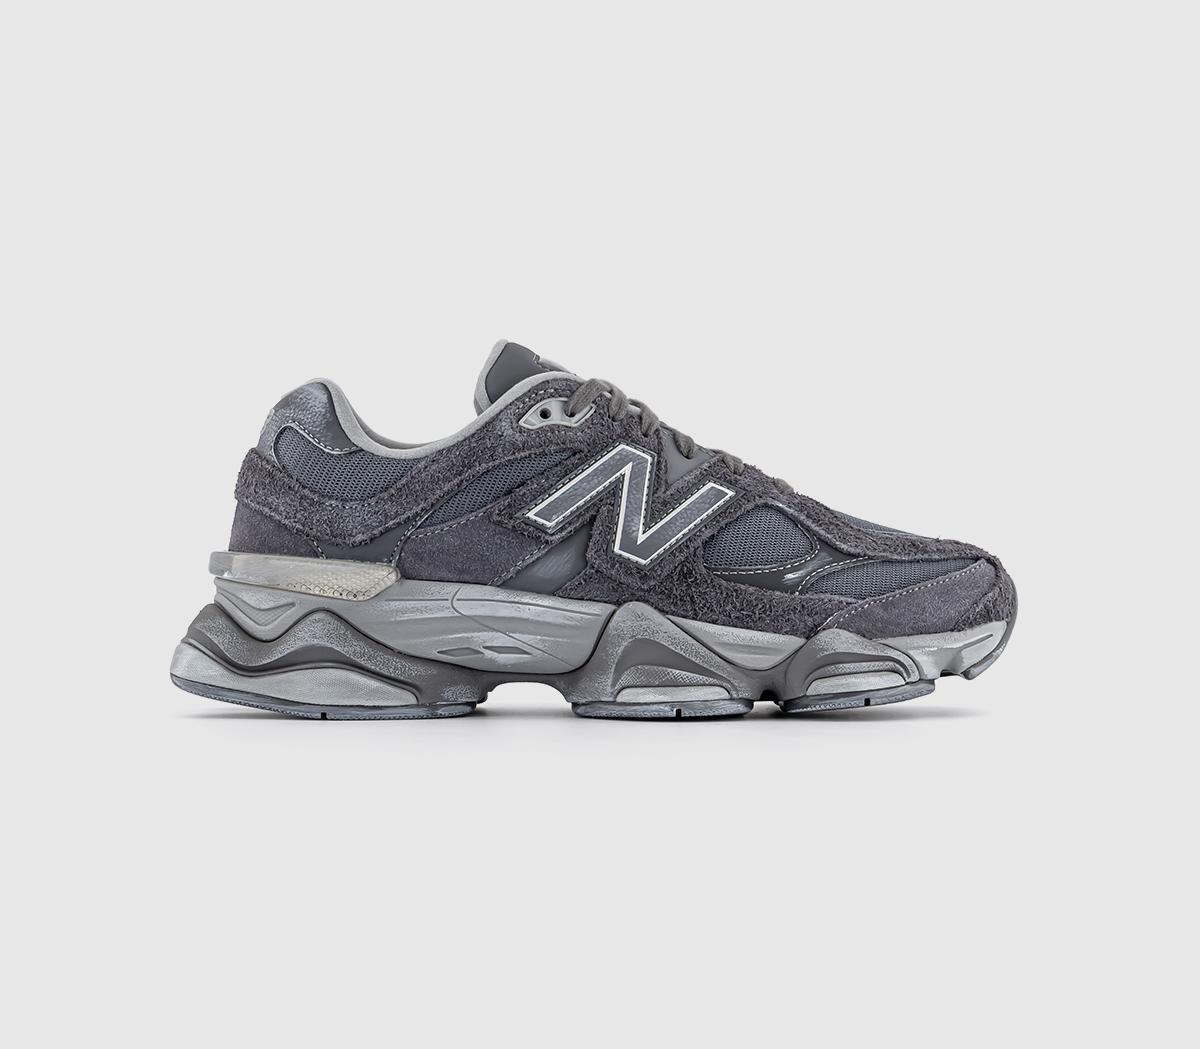 New Balance9060 Trainers Magnet Grey